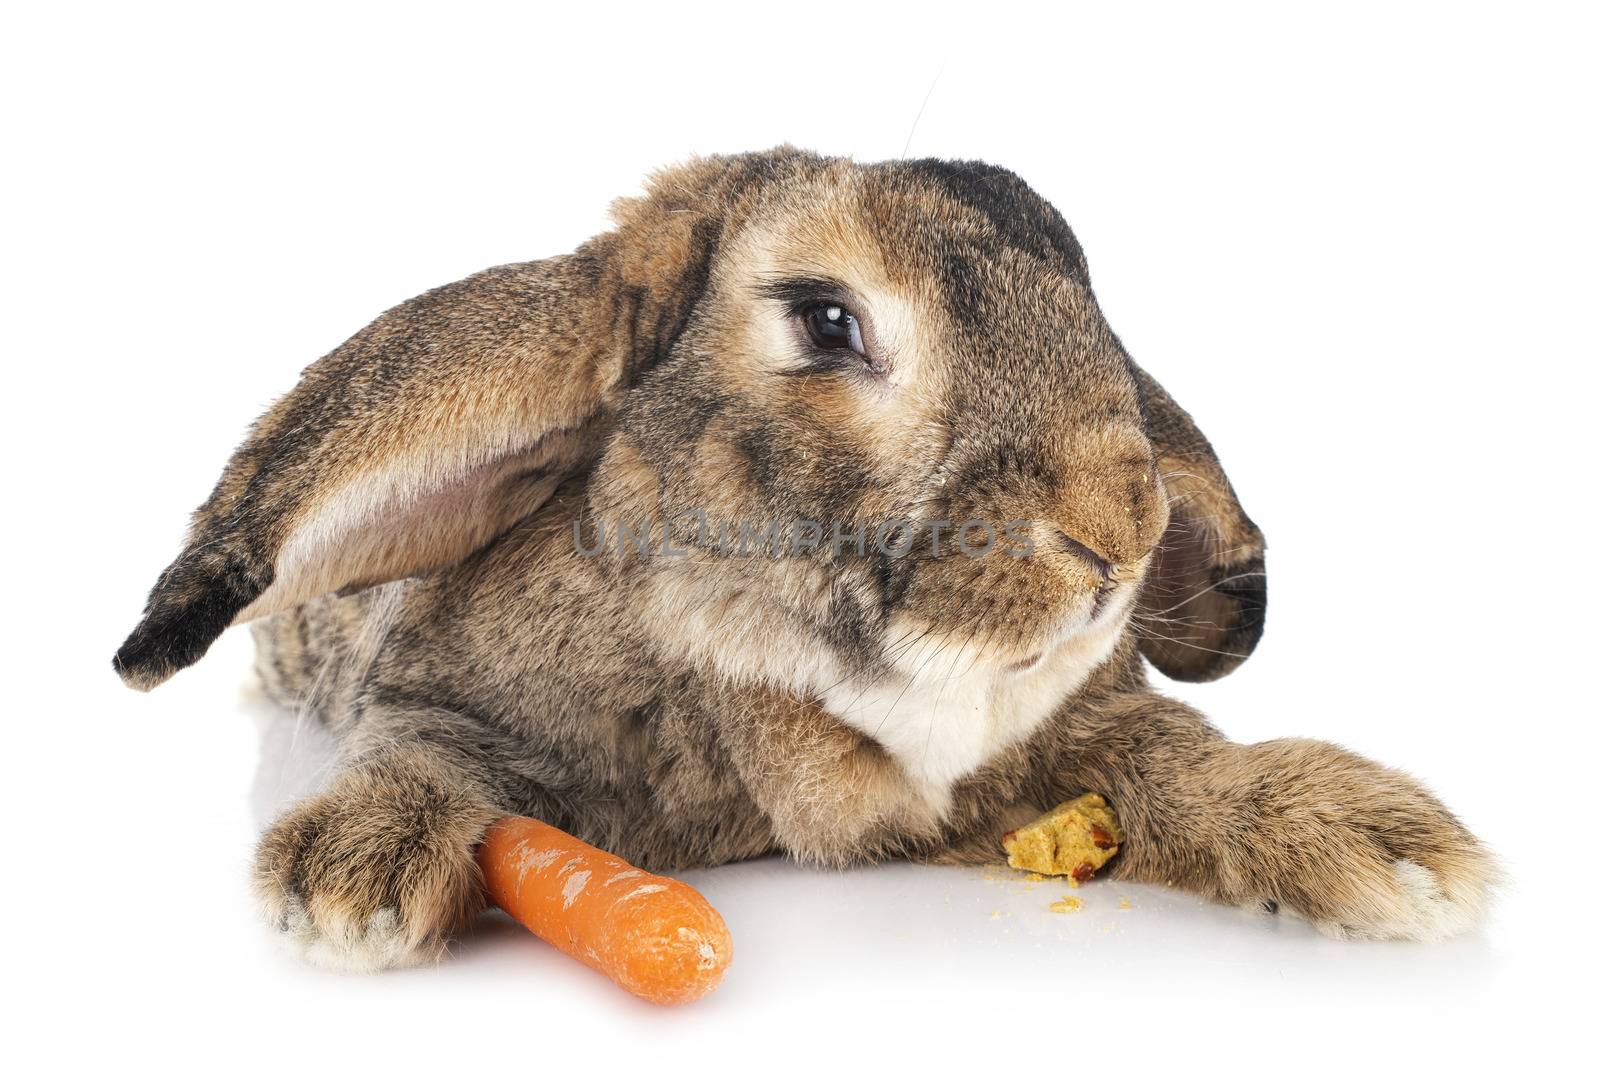 Flemish Giant rabbit in front of white background